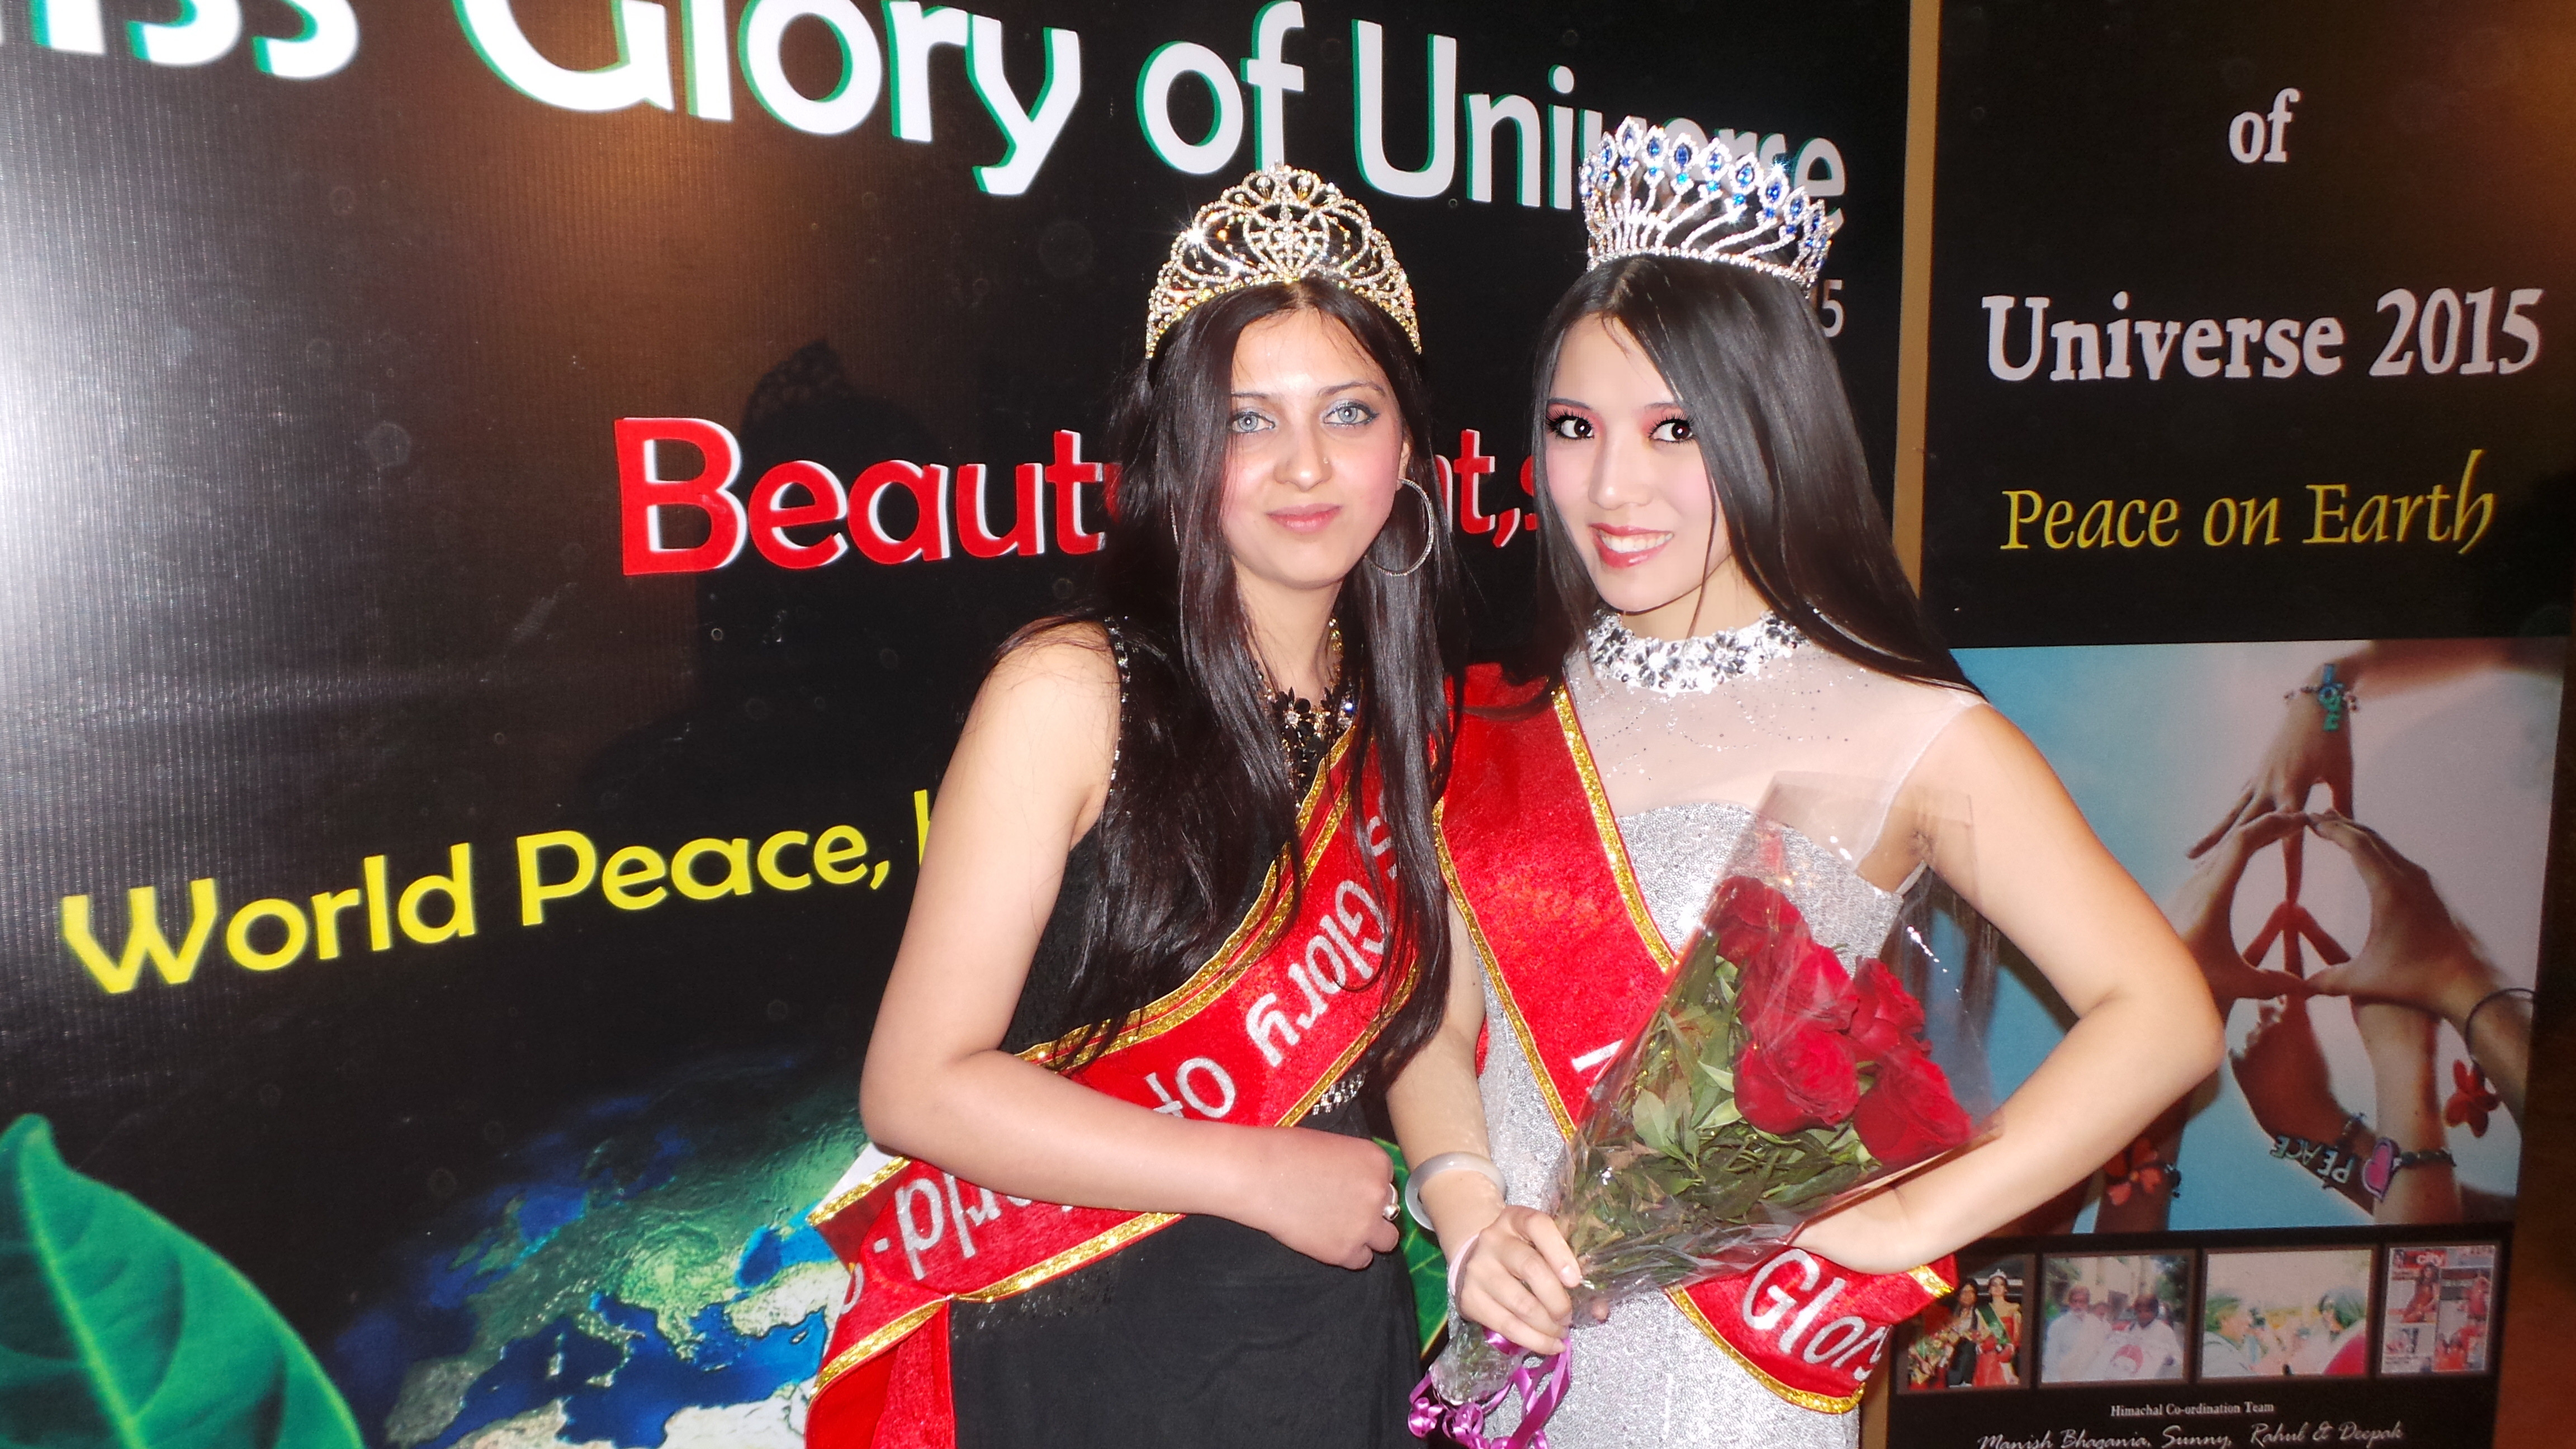 Miss Glory of Universe crown